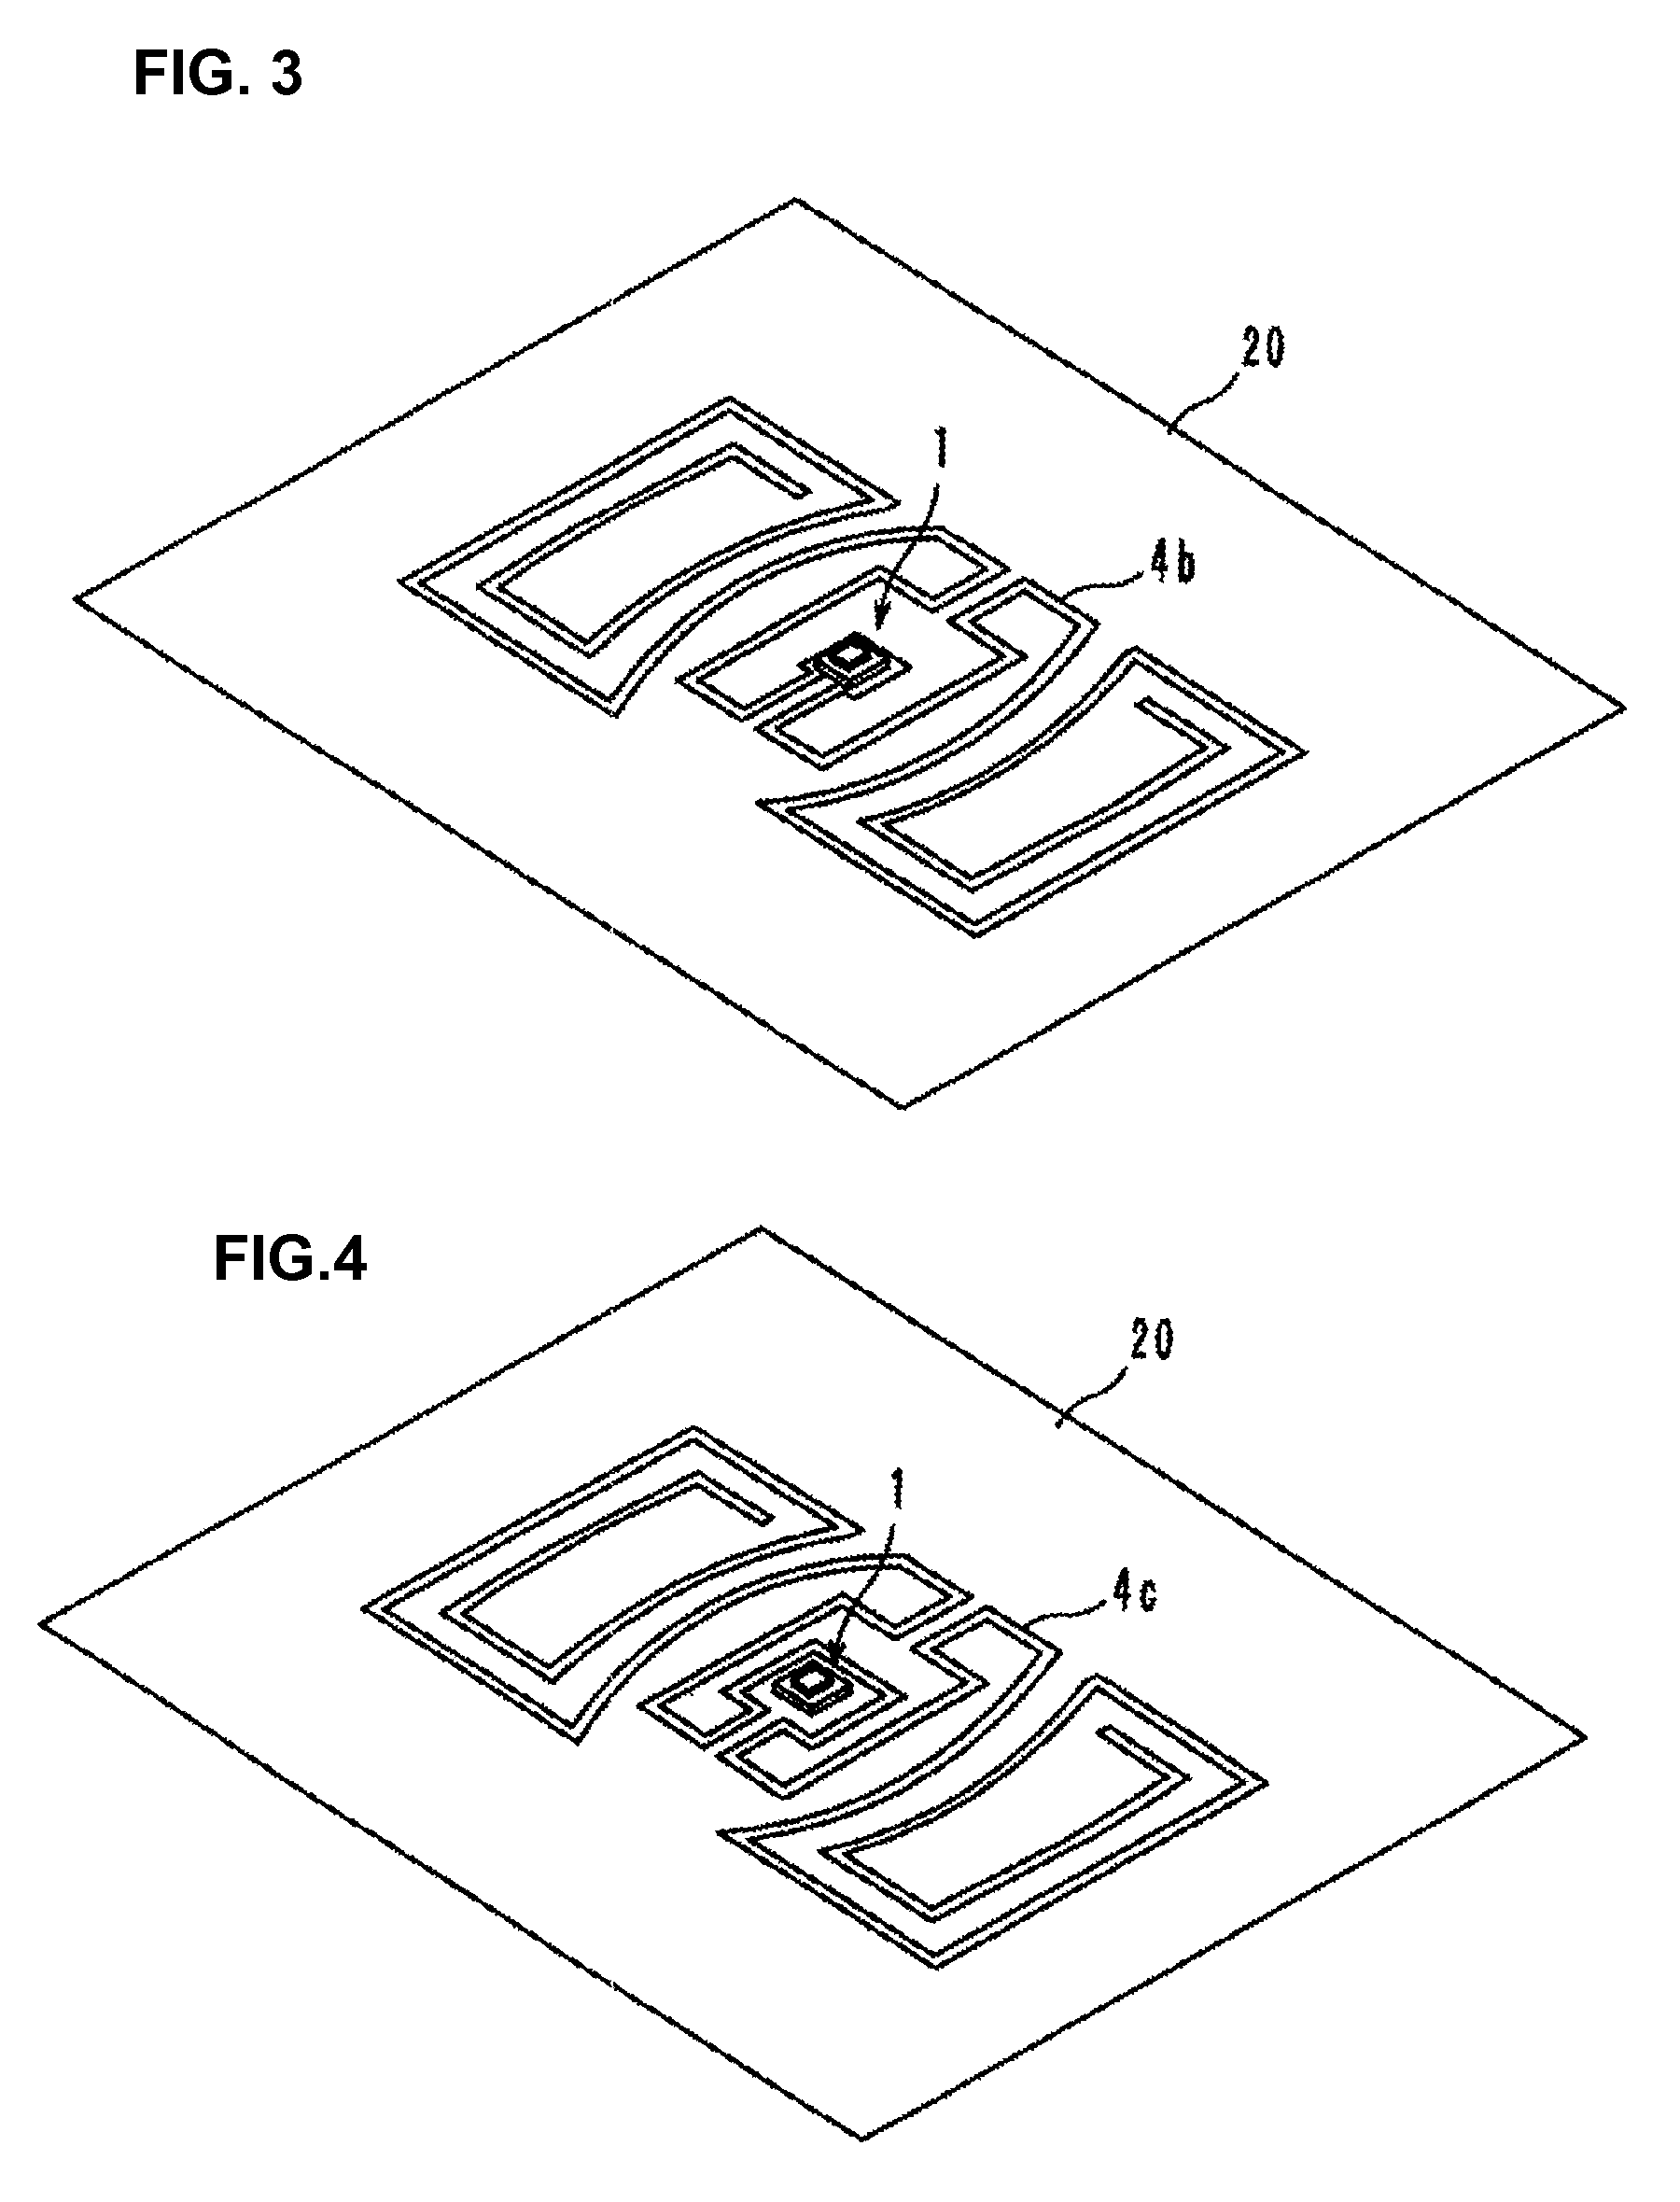 Article having electromagnetic coupling module attached thereto